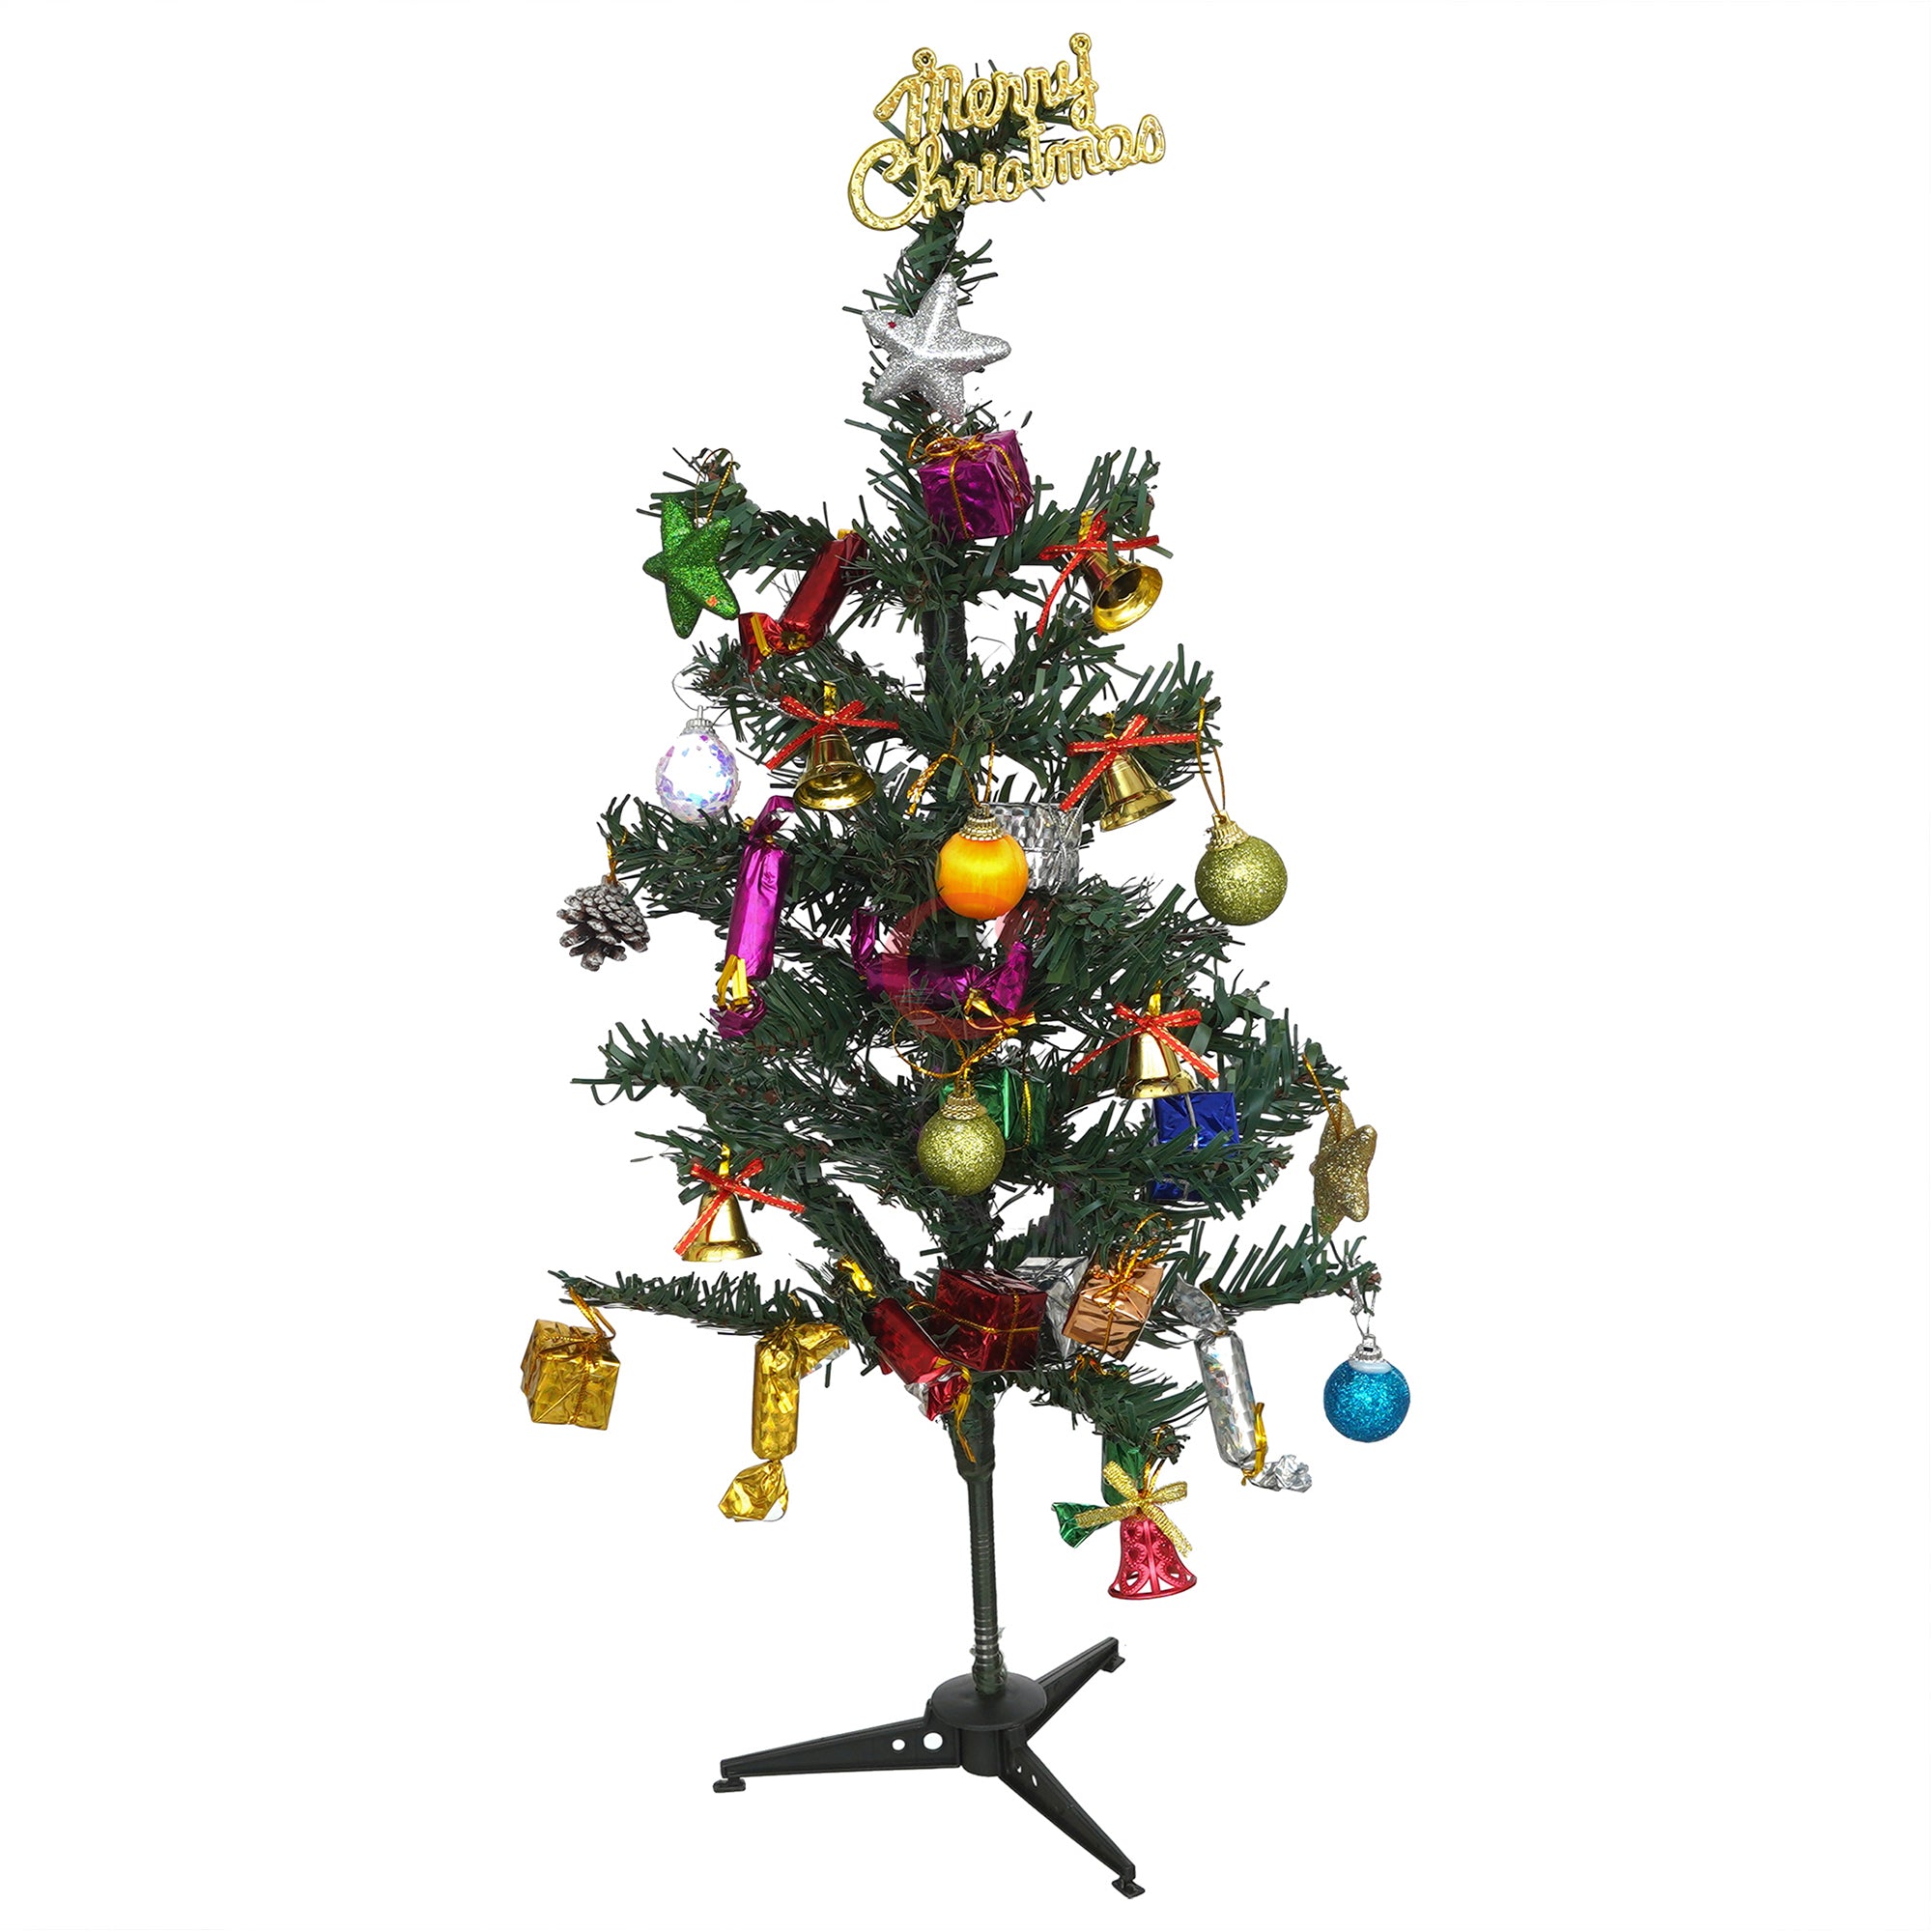 eCraftIndia 2 Feet Green Artificial Christmas Tree Xmas Pine Tree with Metal Stand - Xmas Tree for Indoor, Outdoor, Home, Living Room, Office, Church Decor - Merry Christmas Decoration Item 7